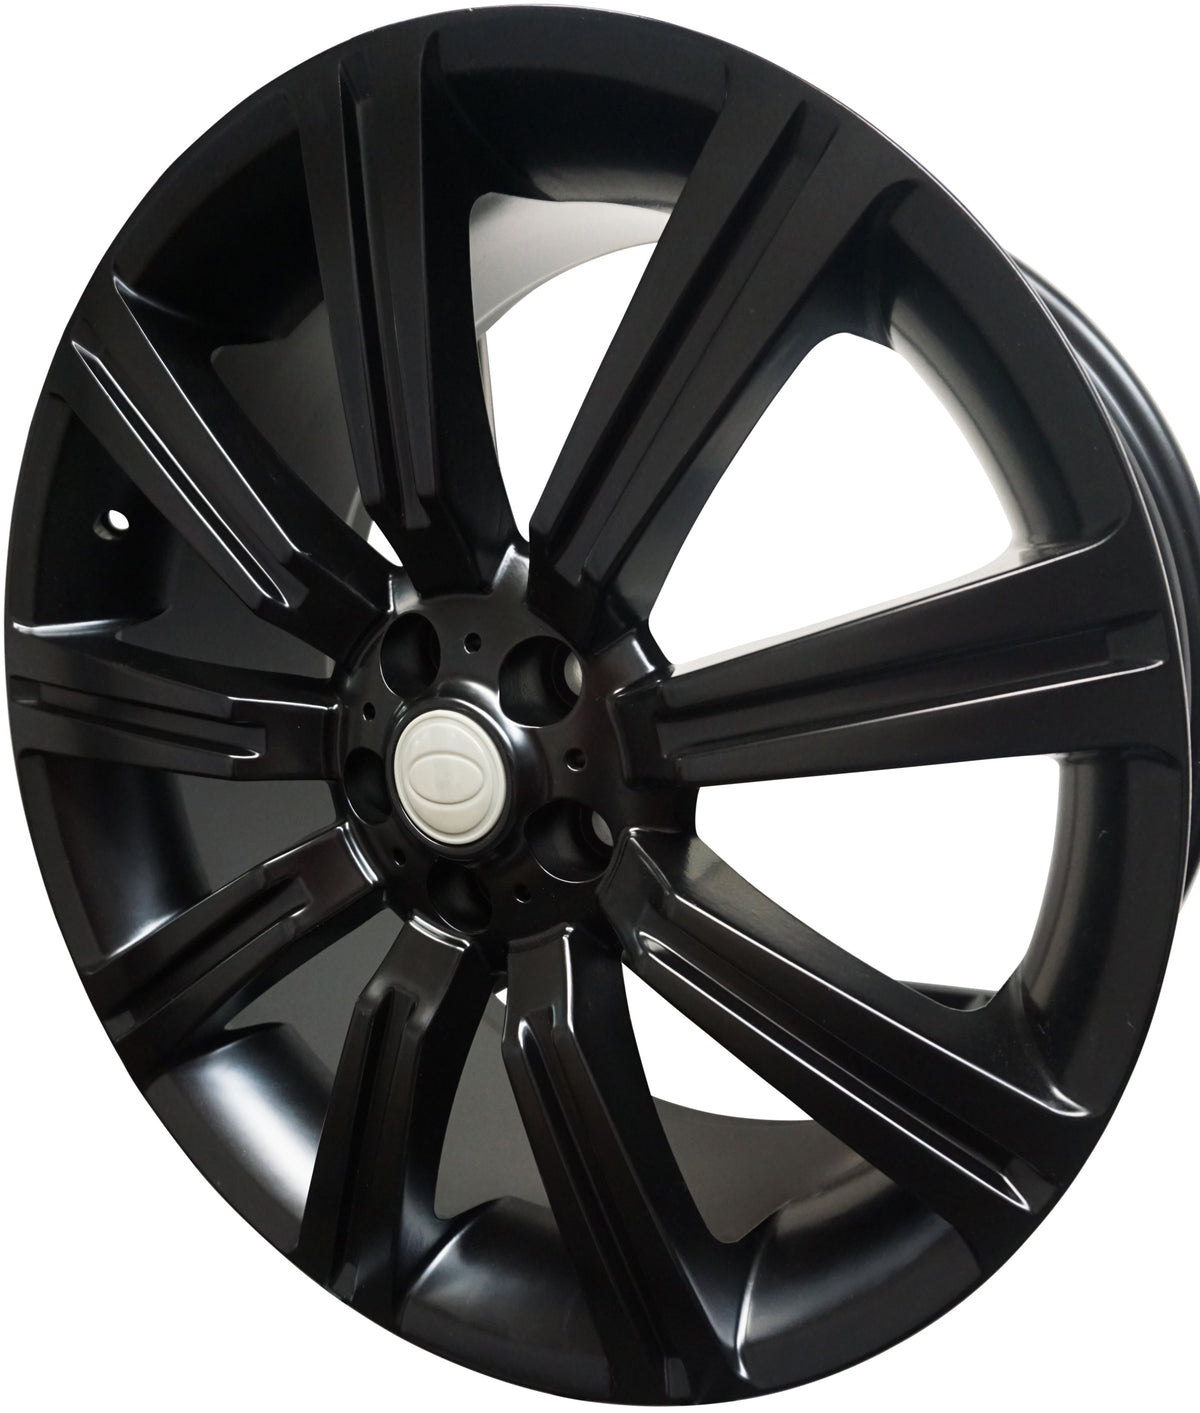 22 INCH RIMS RANGE ROVER FIT ALL HSE/ HSE SPORT SVR GLOSS BLACK STORMERS WHEELS